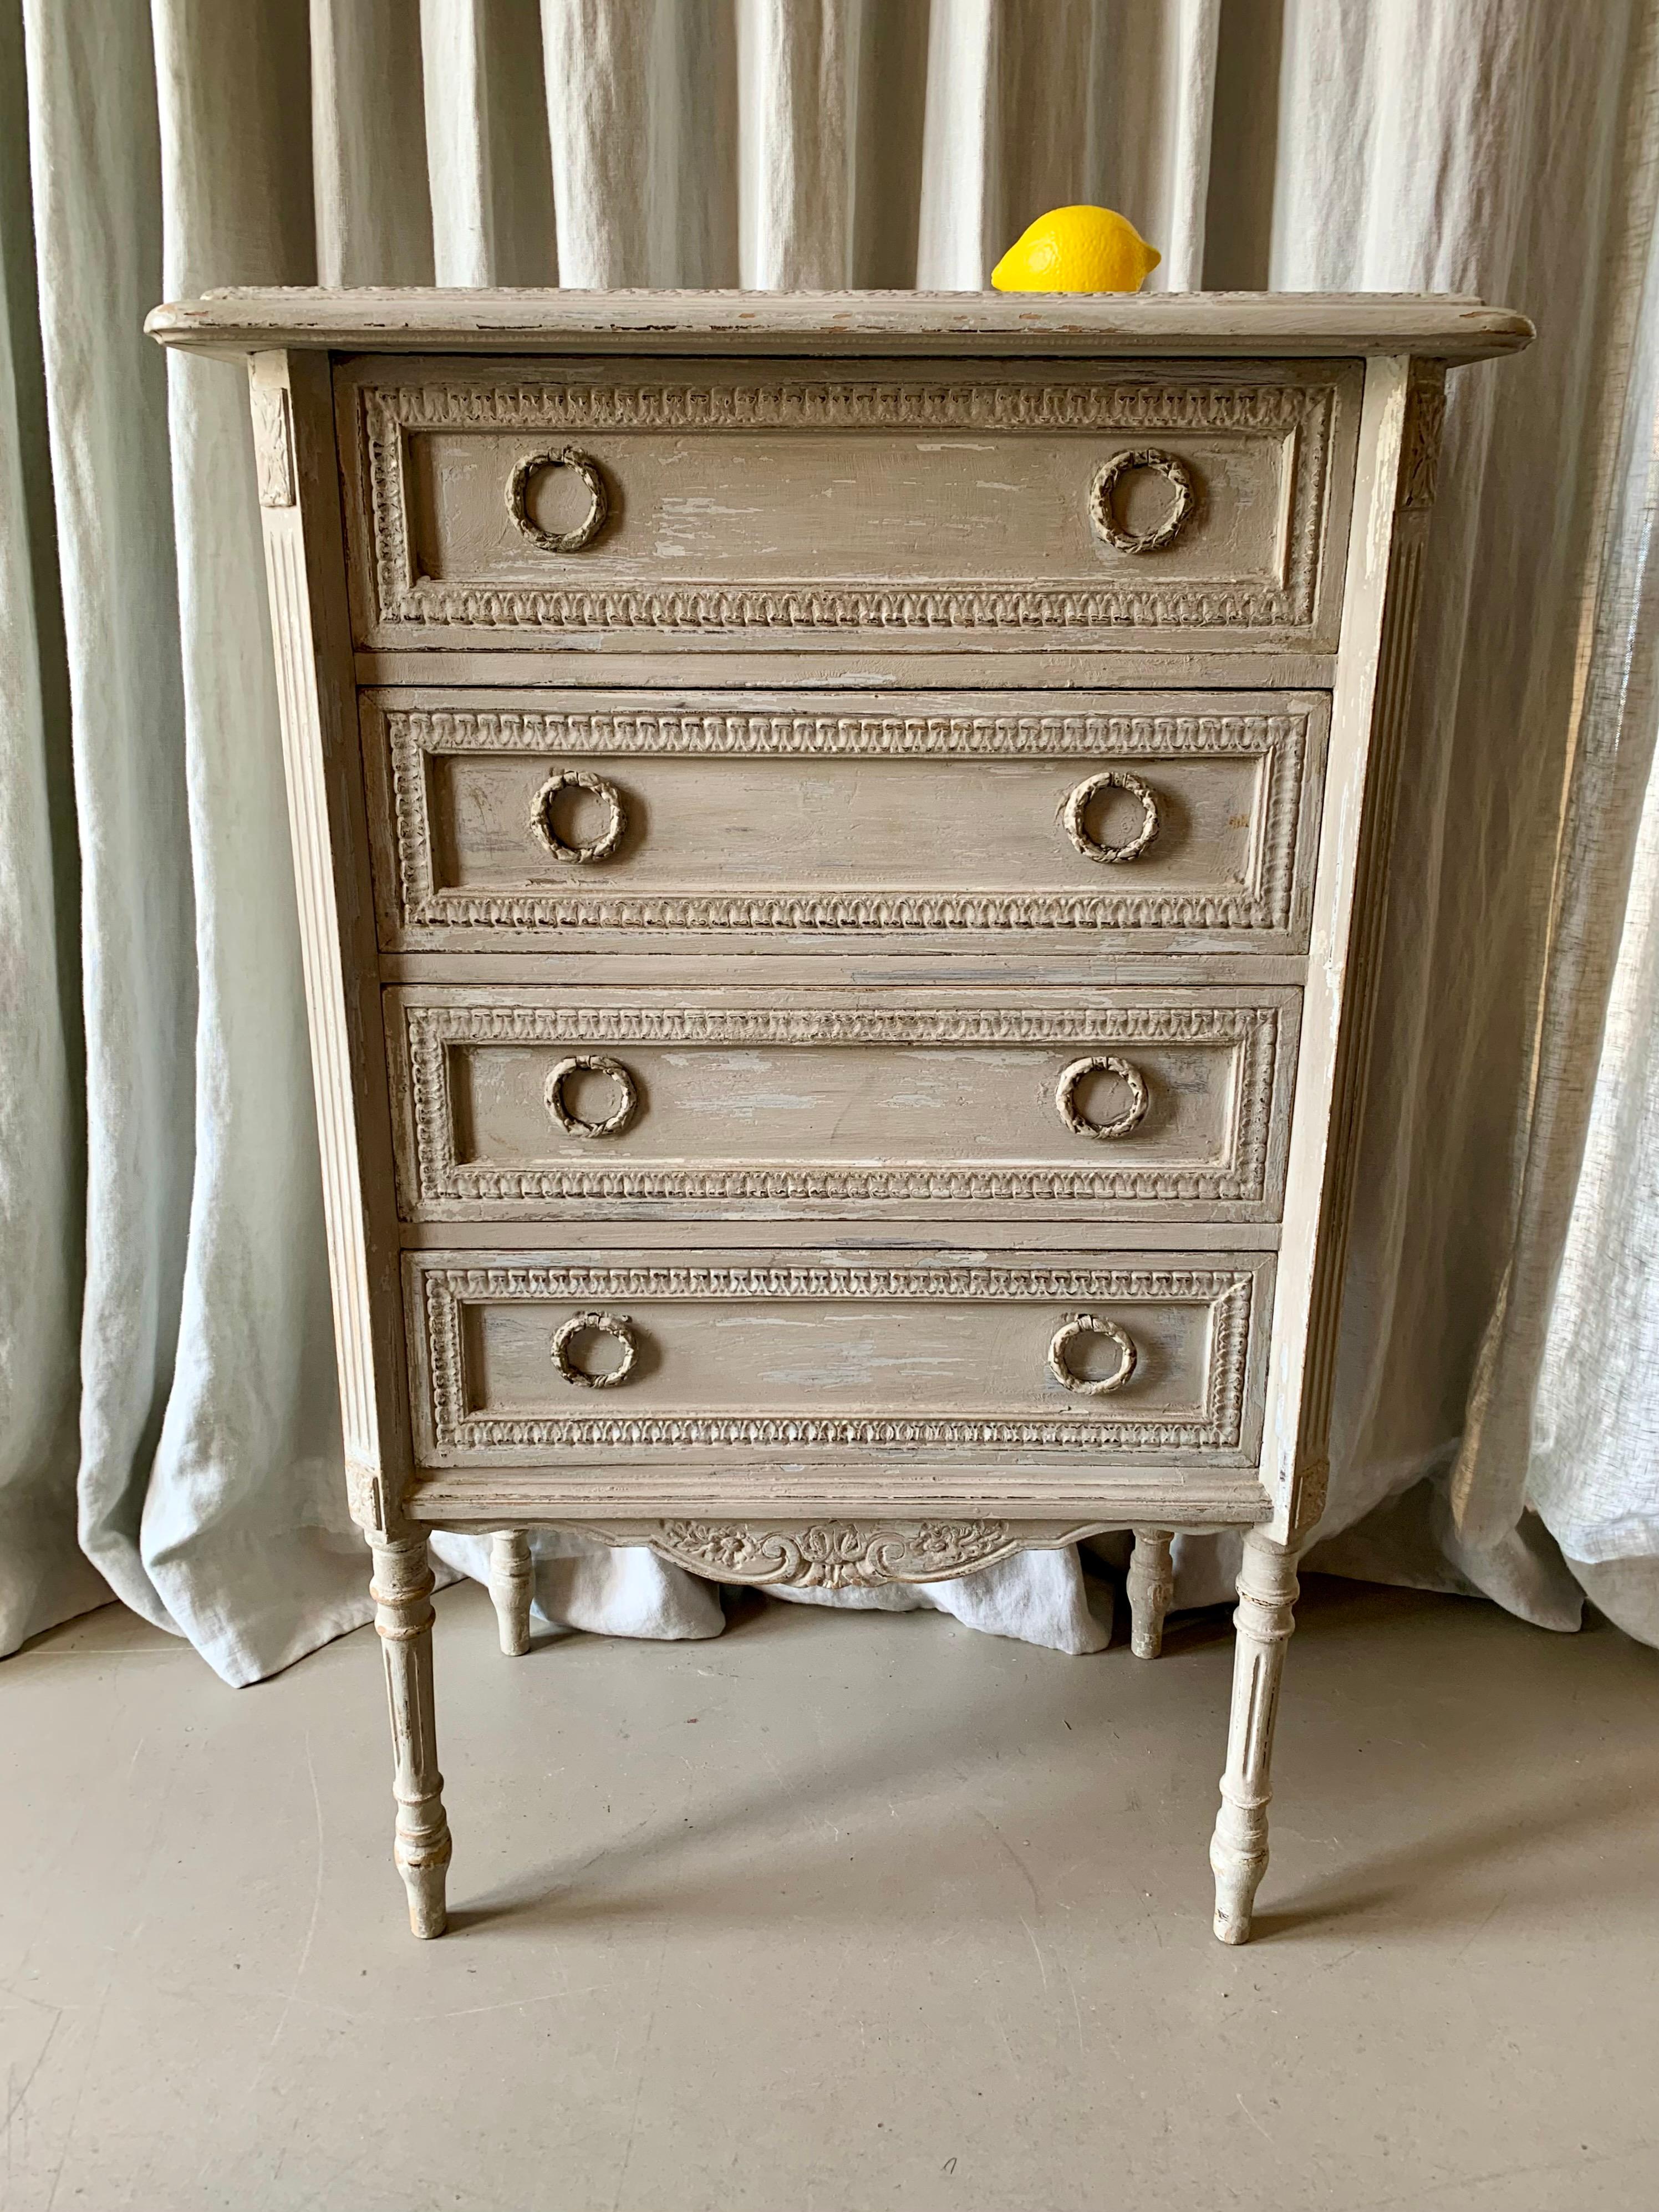 Antique Louis XVI style commode with 4 drawers and decorative carvings - beautiful patina on the small painted commode - perfect for the hallway, bedroom or living room.